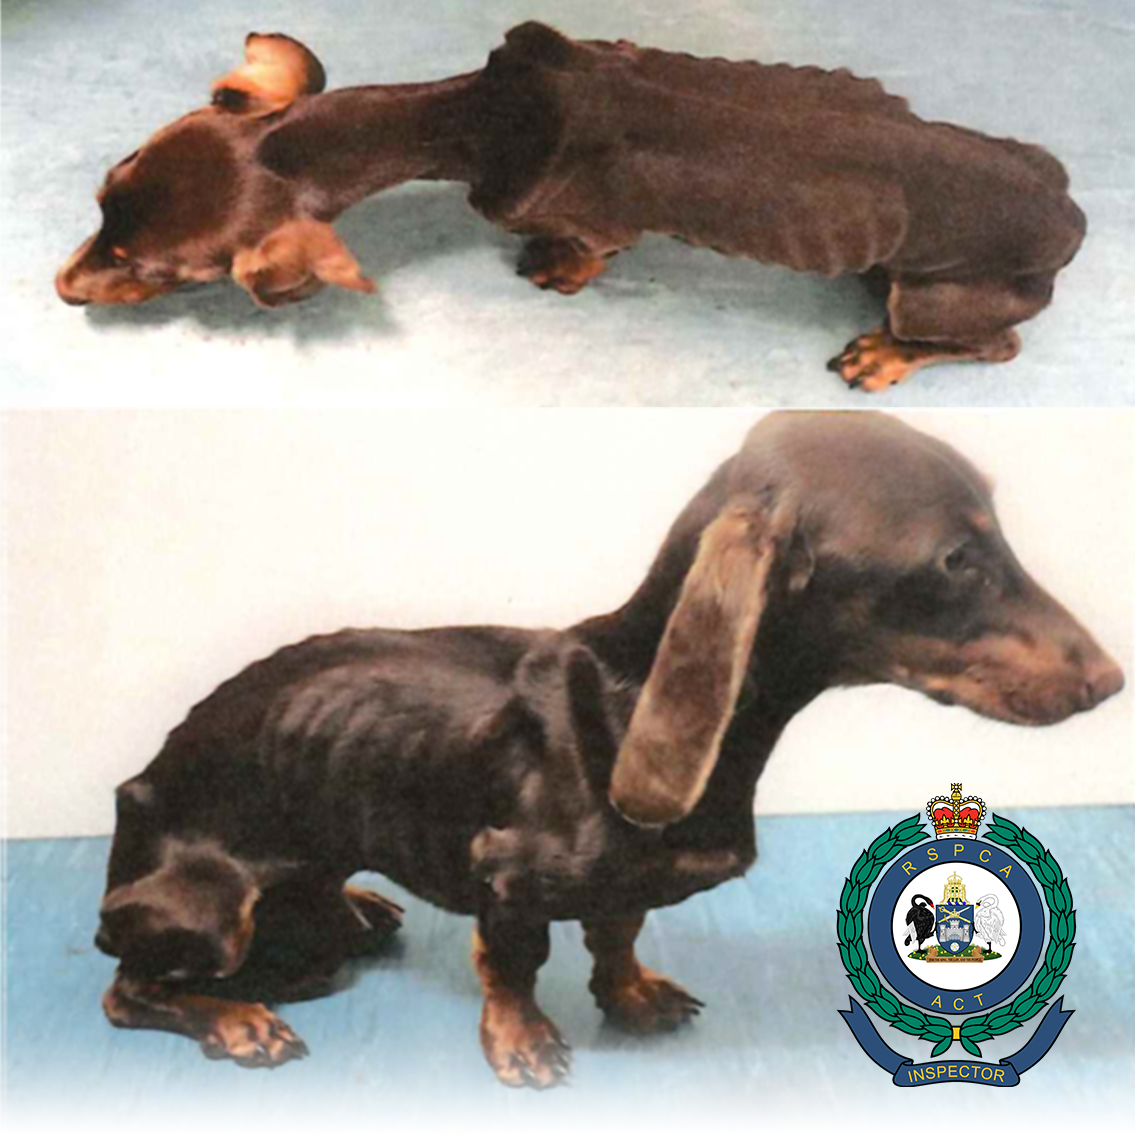 photograph of a tiny brown dachshund with ribcage and spine quite visible through the animals skin